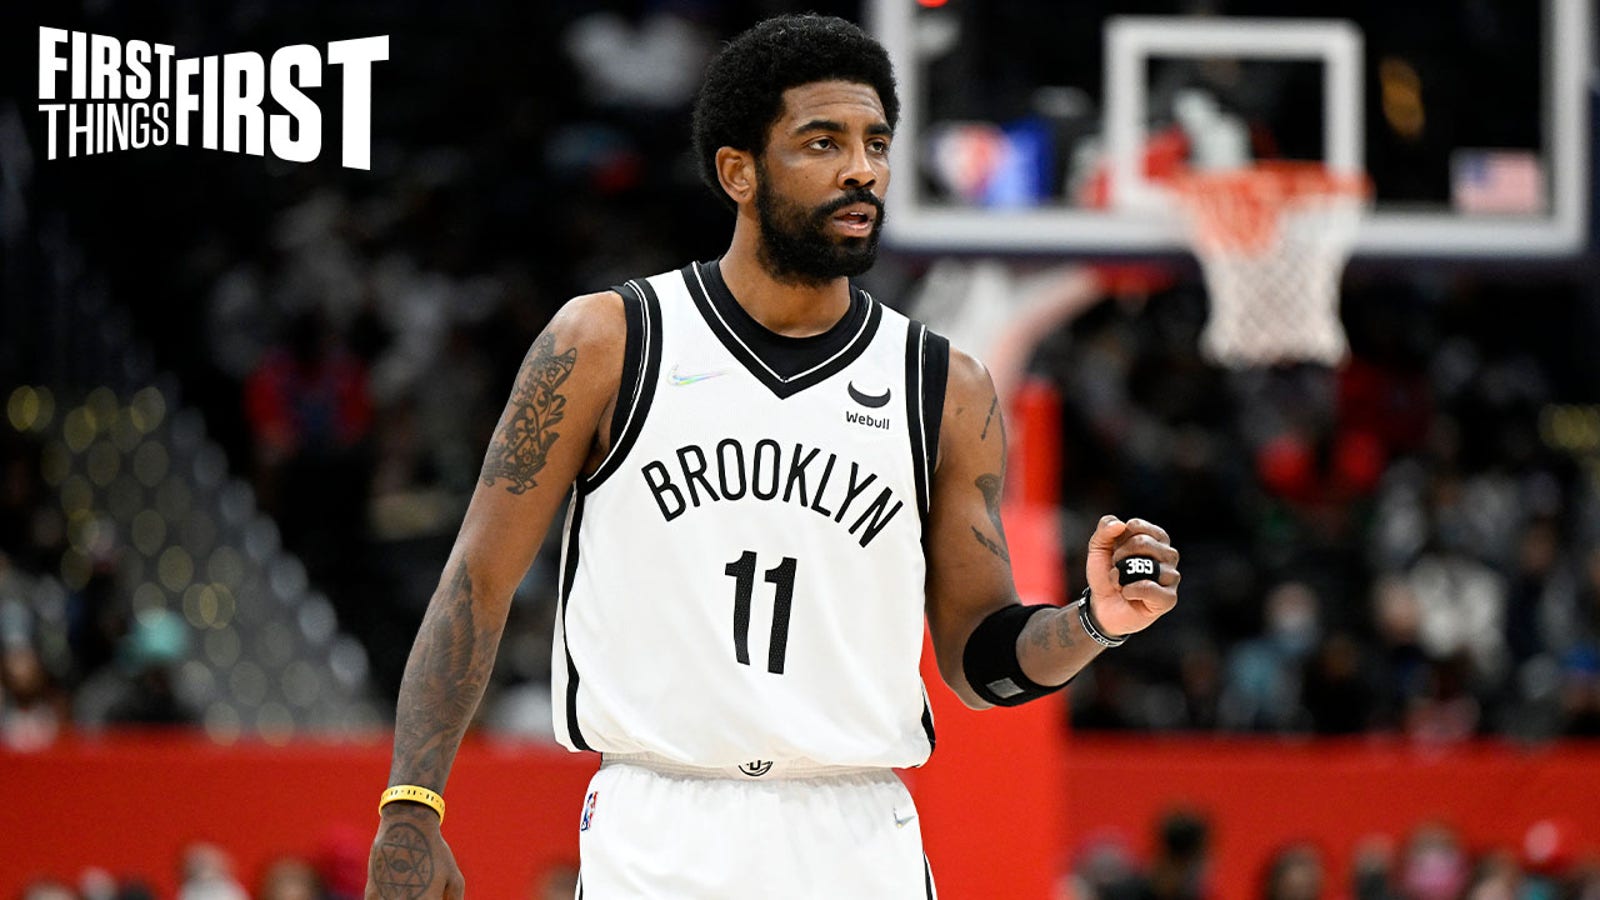 Kyrie Irving is confident in the Nets post All-Star break I FIRST THINGS FIRST